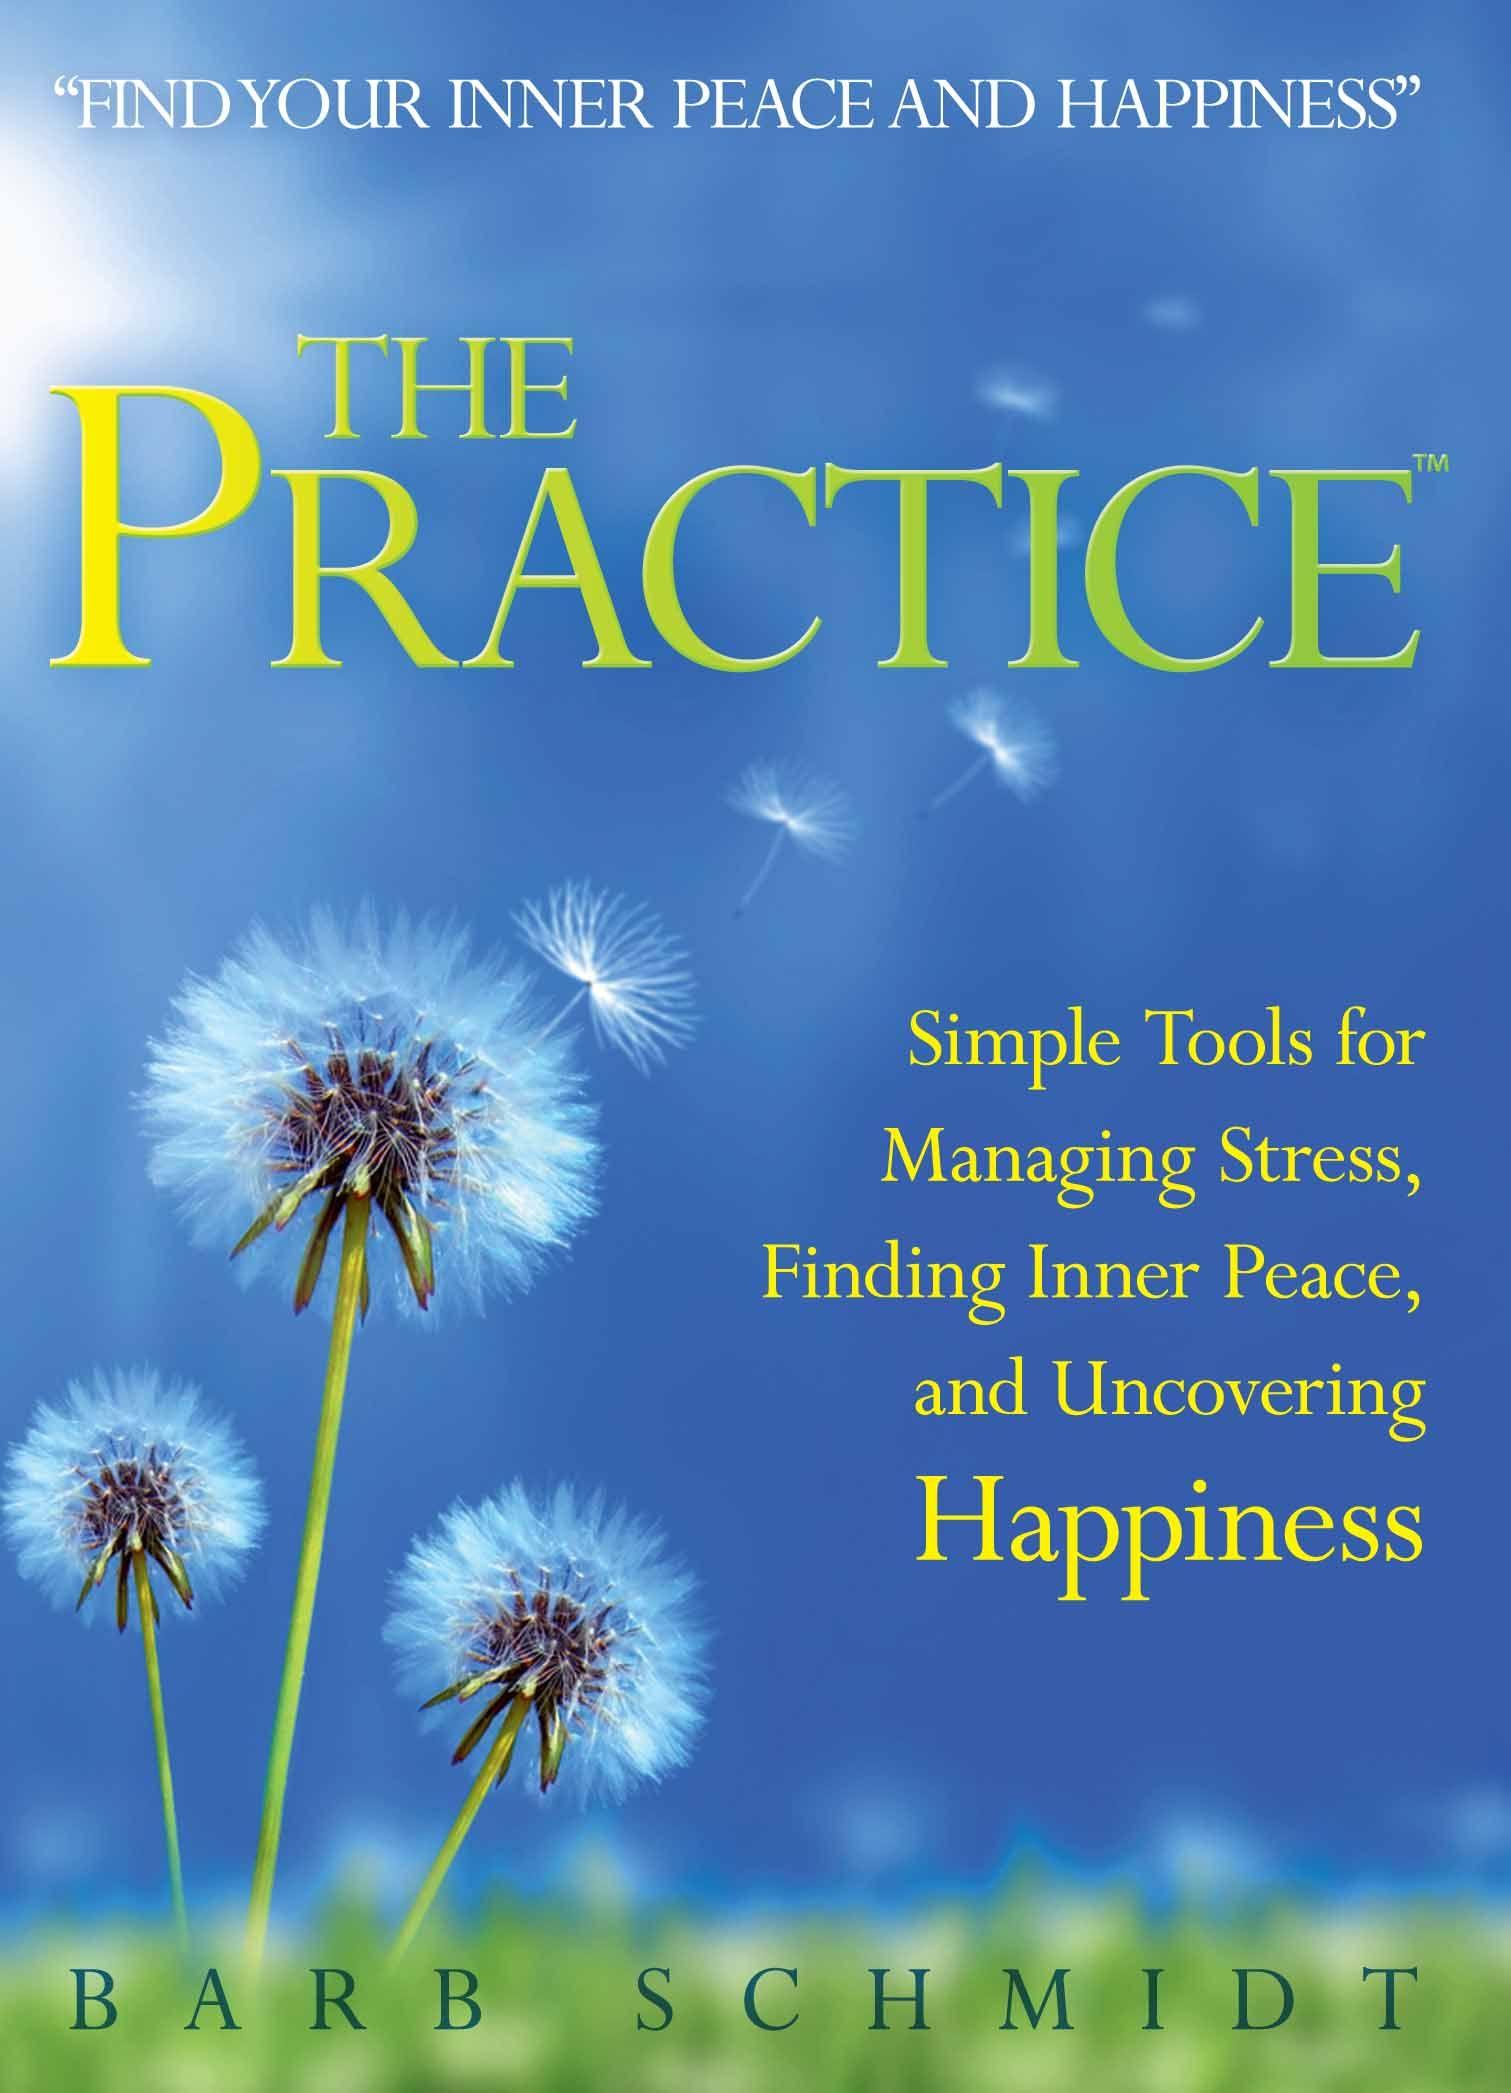 Simple Strategies for Reducing Stress and Finding Inner Peace